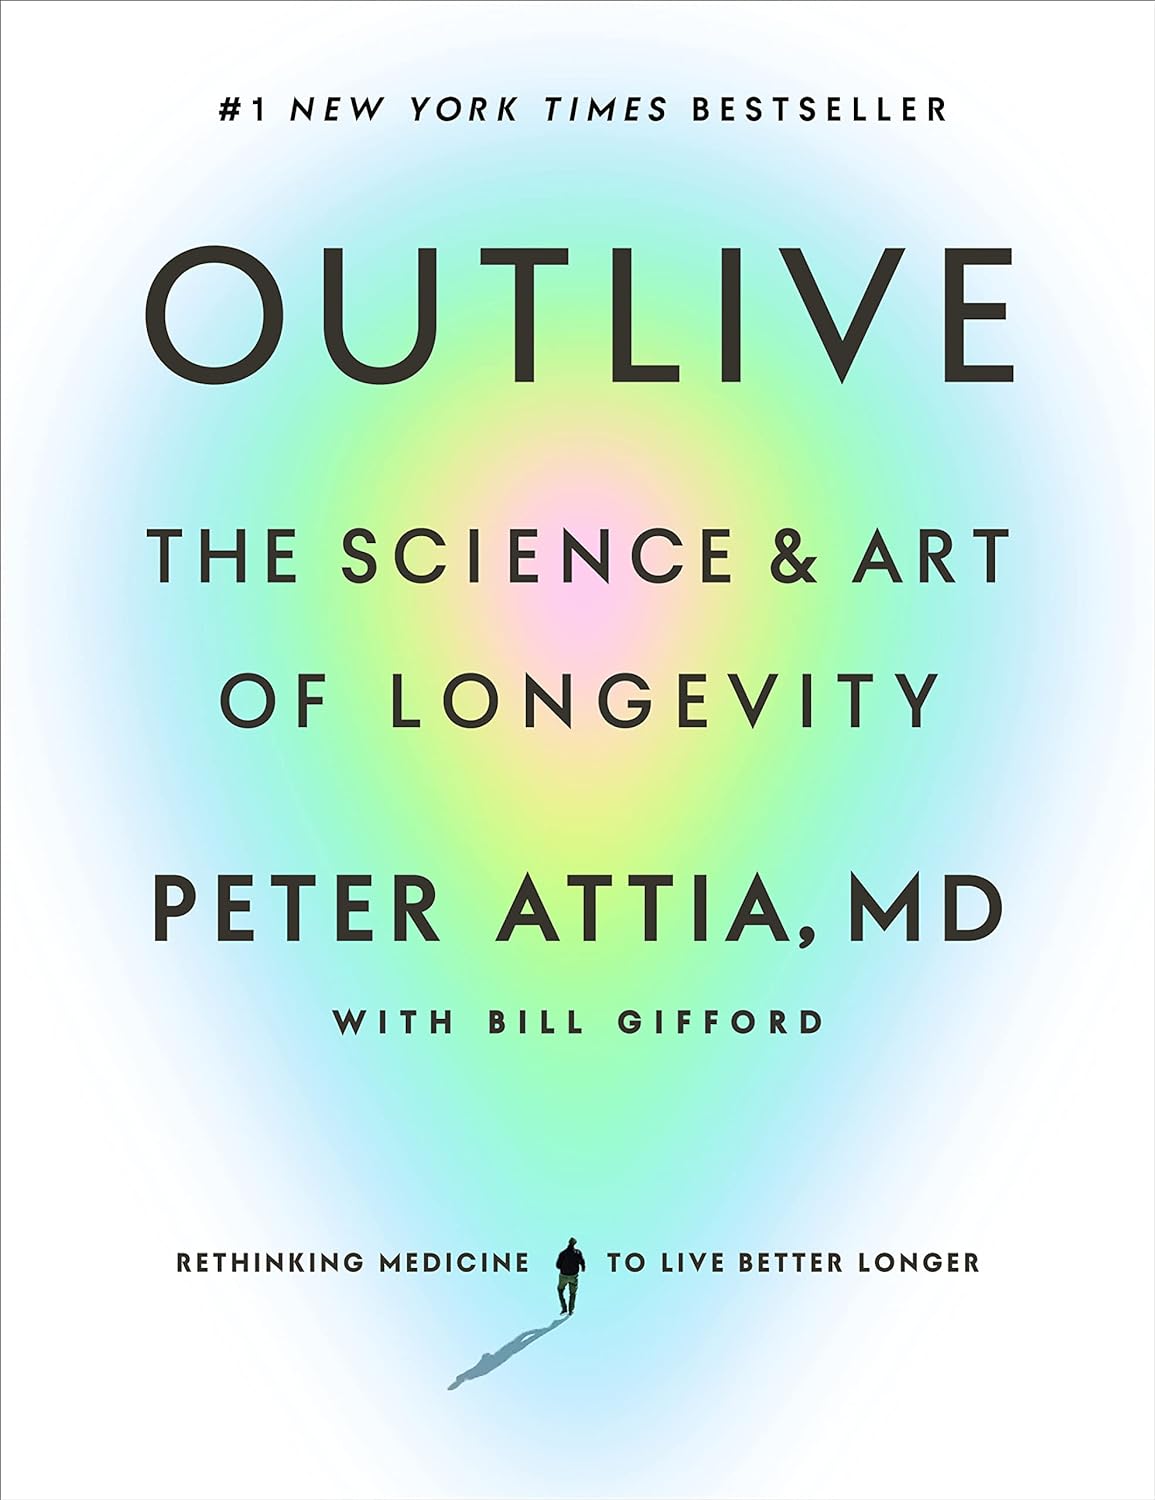 outlive by peter attia